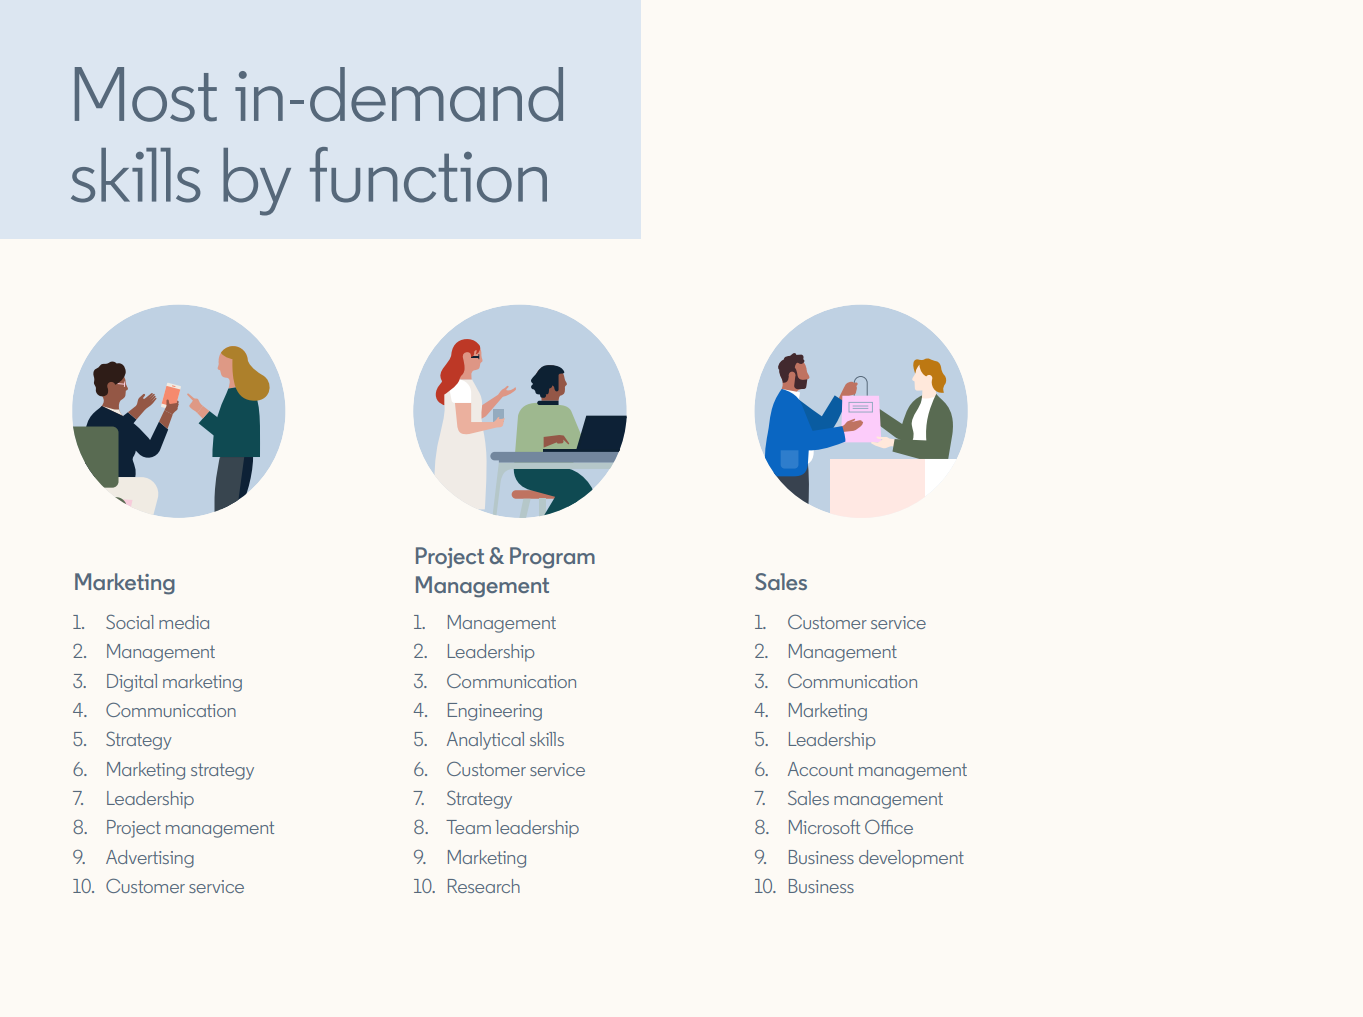 Top Professional Development Trends and Most In-Demand Skills for the Contemporary Job Market, according to LinkedIn's 2023 Work-based Learning Survey / Digital Information World